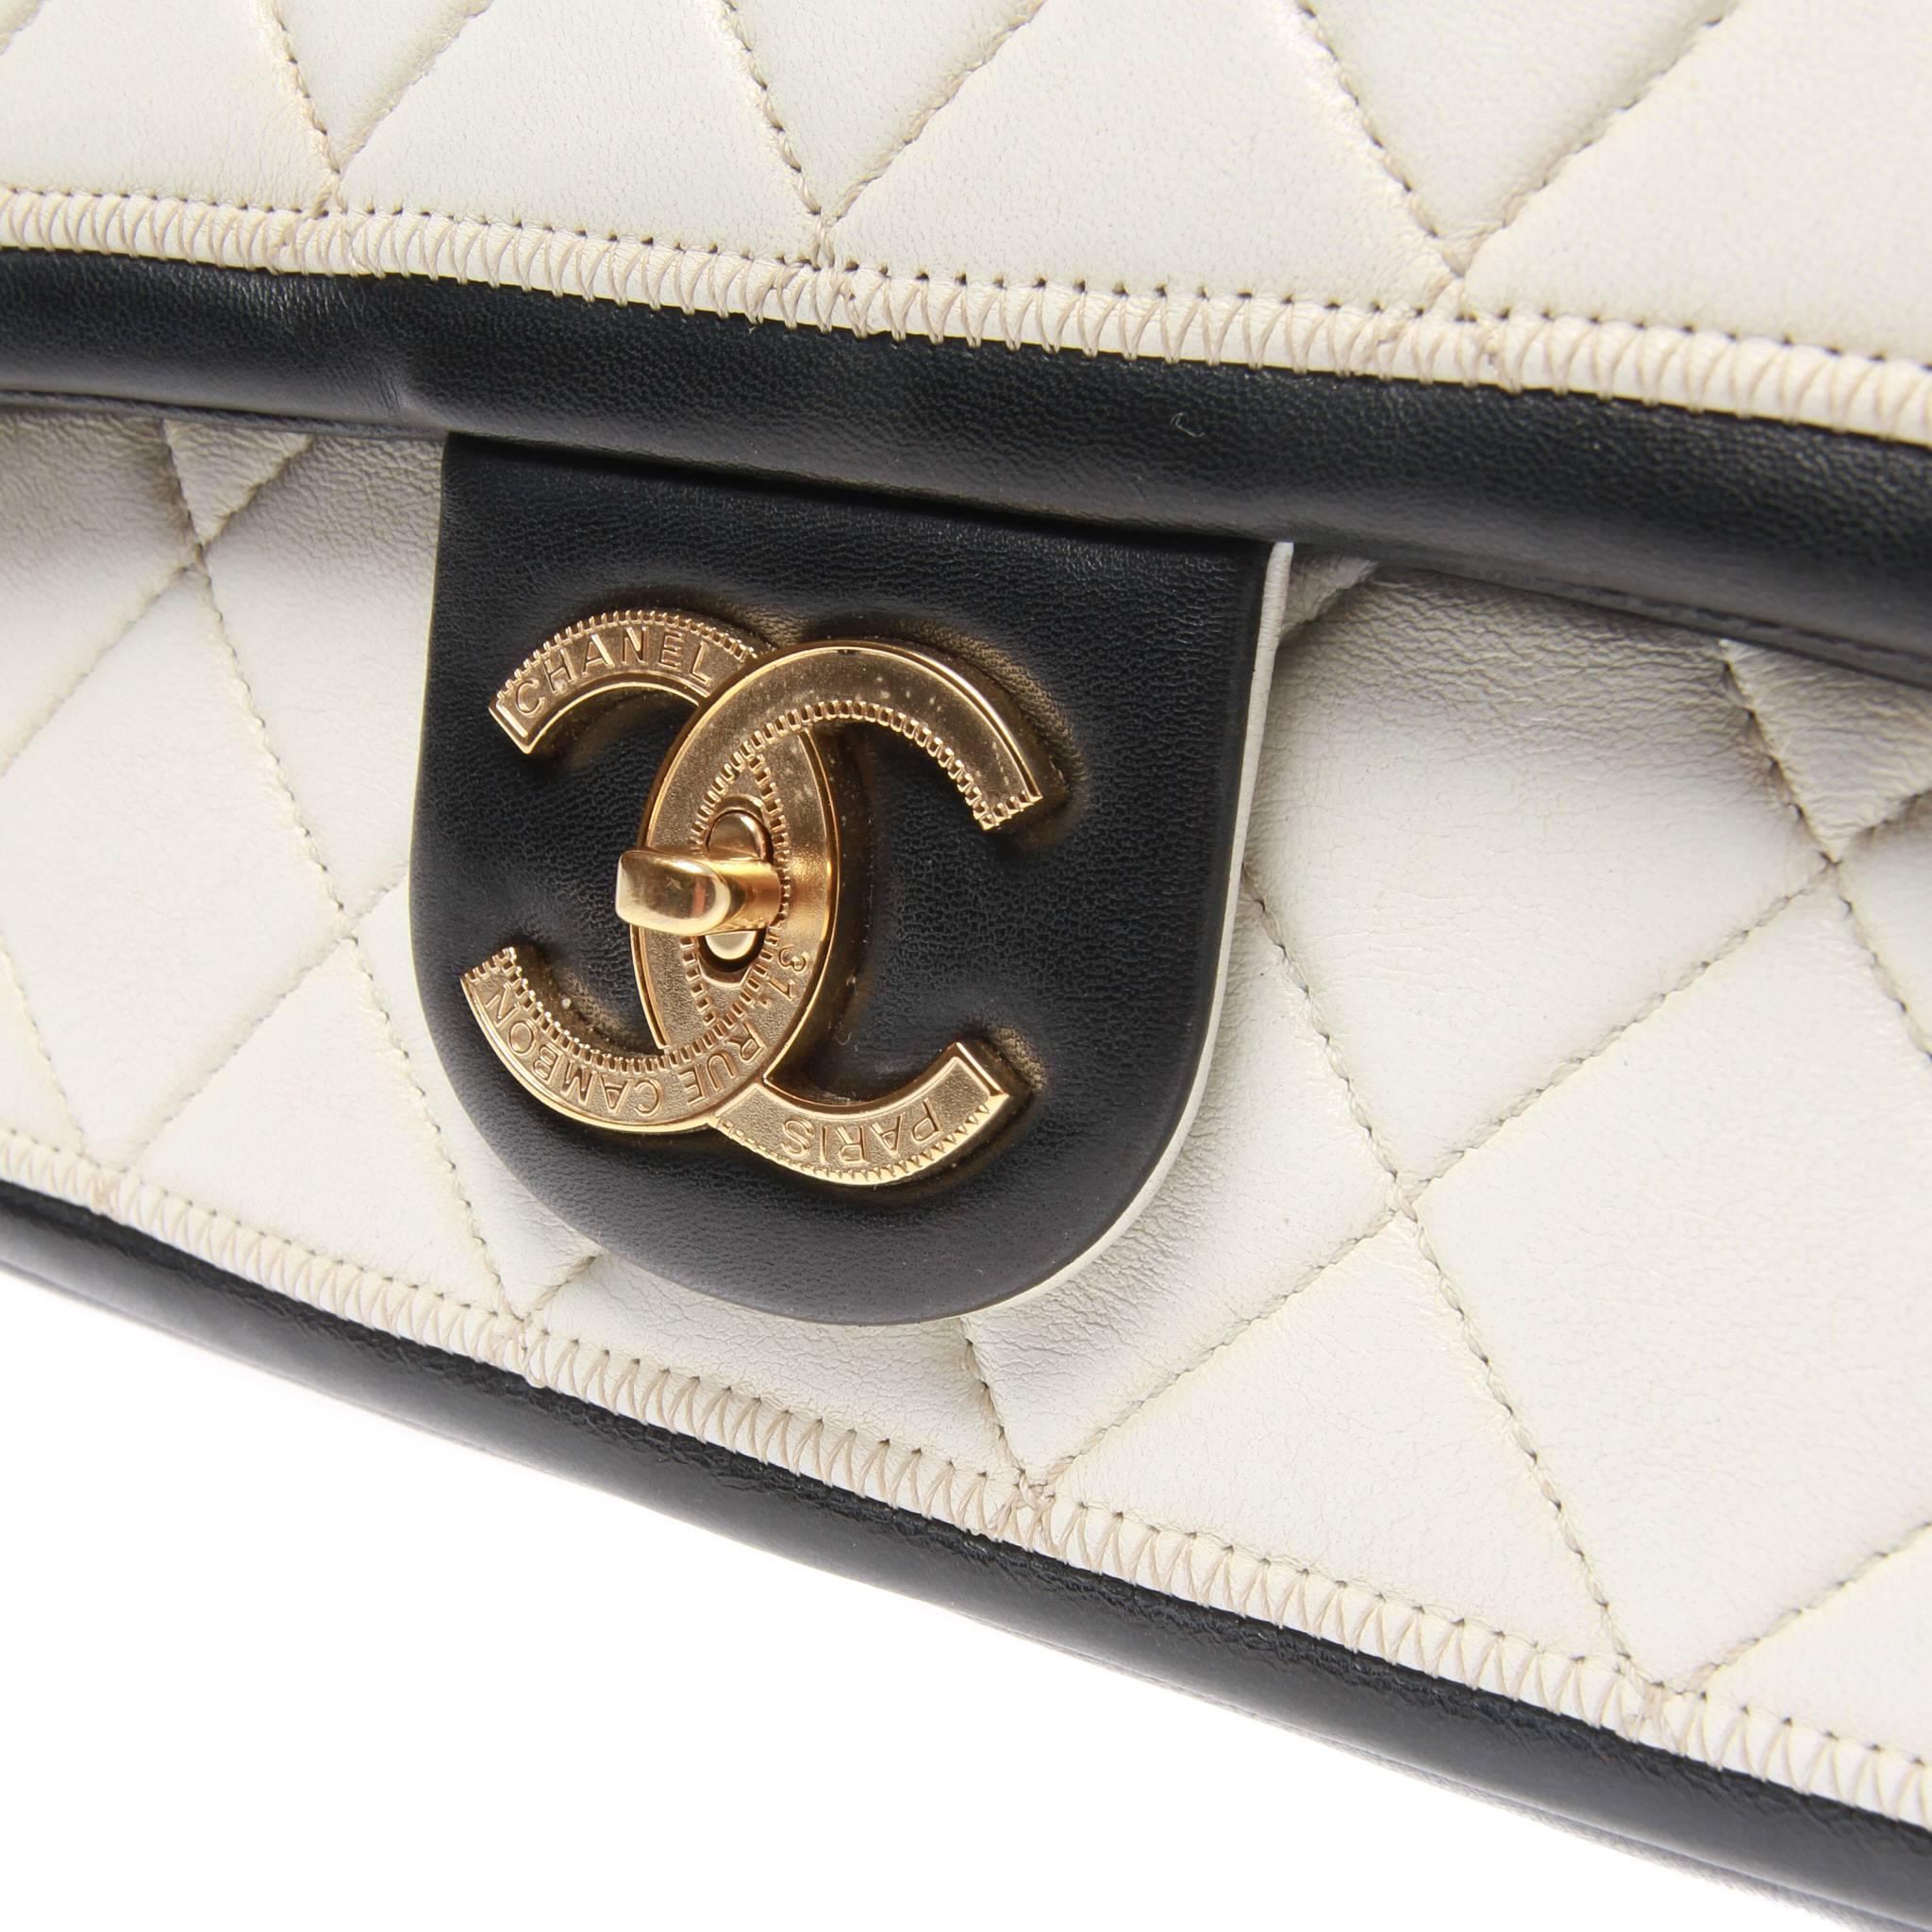 A fabulous classic lambskin caviar flap bag by CHANEL.
Intricately crafted with black and white quilted lambskin, flap with interlocking CC logo closure,
and features gold-tone chain-trimmed shoulder strap.